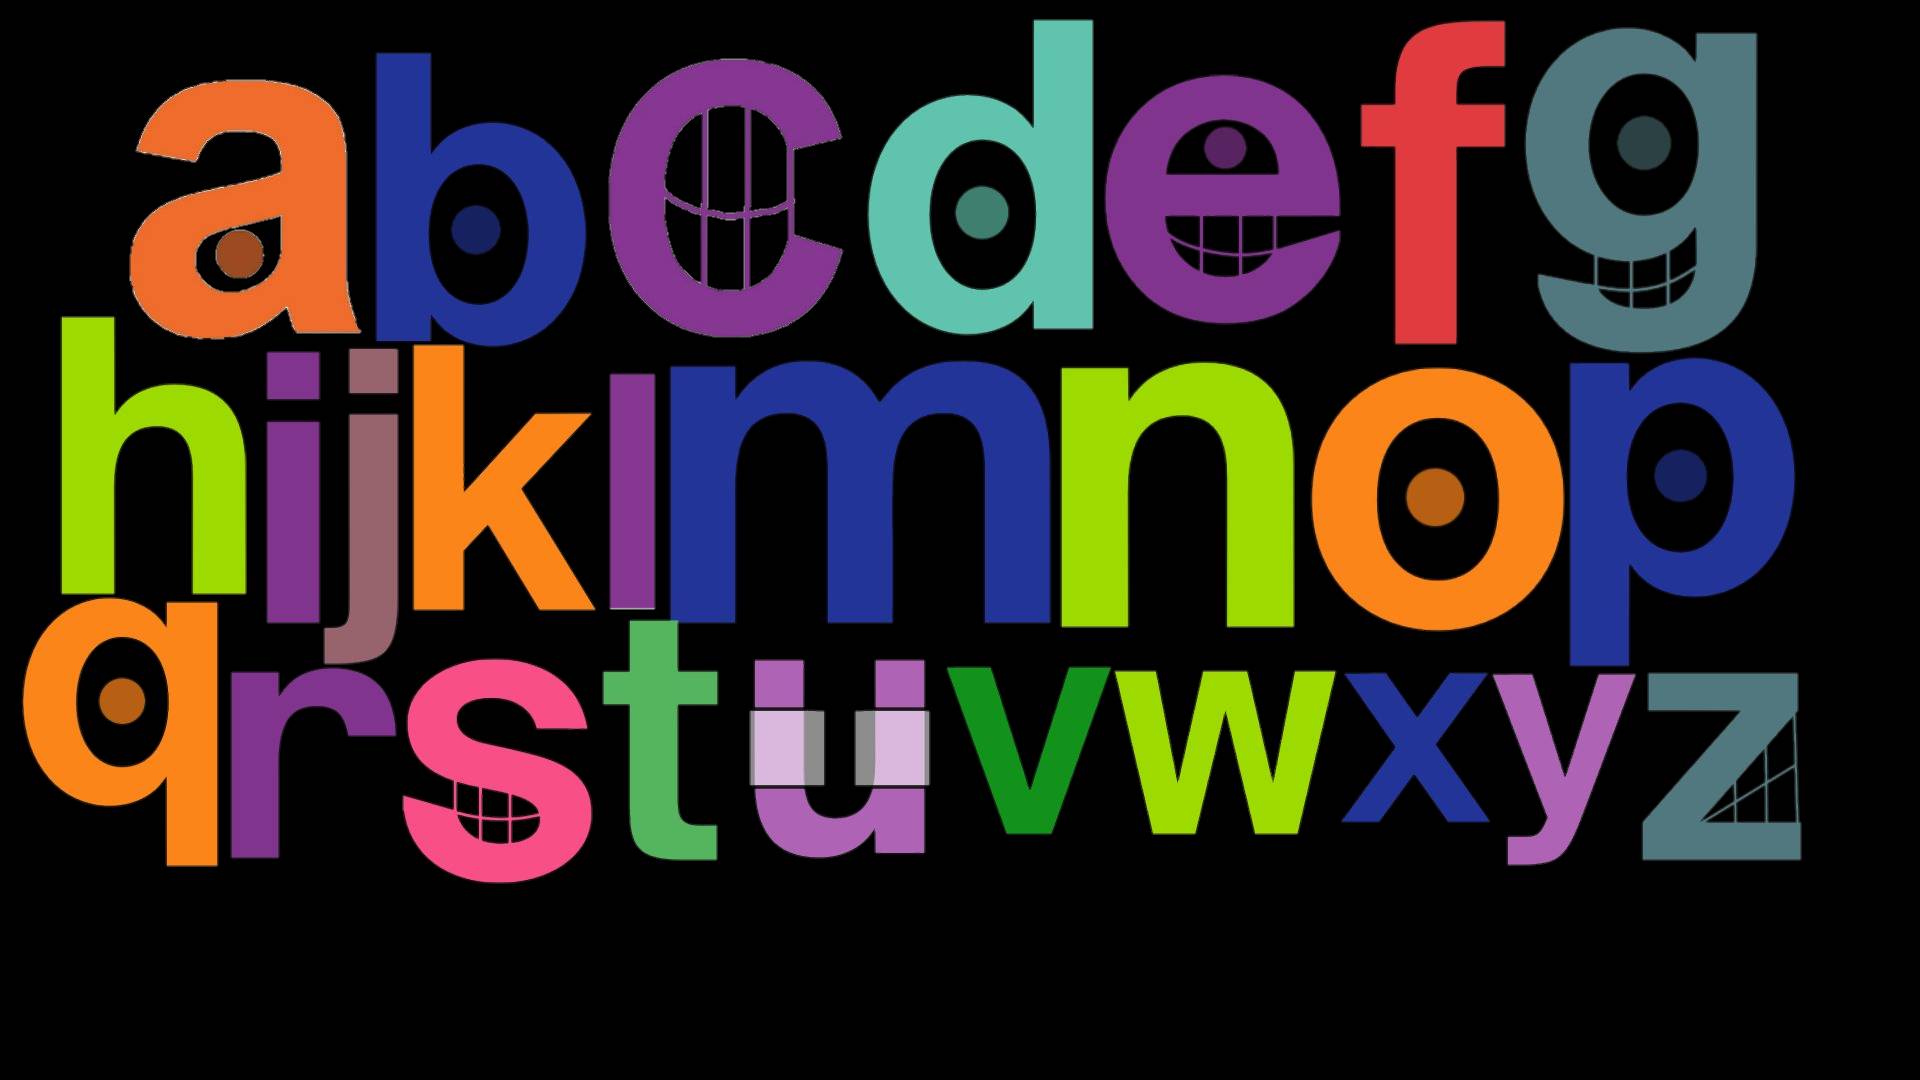 Tvokids A (Lowercase) (My Version) by alexiscurry on DeviantArt